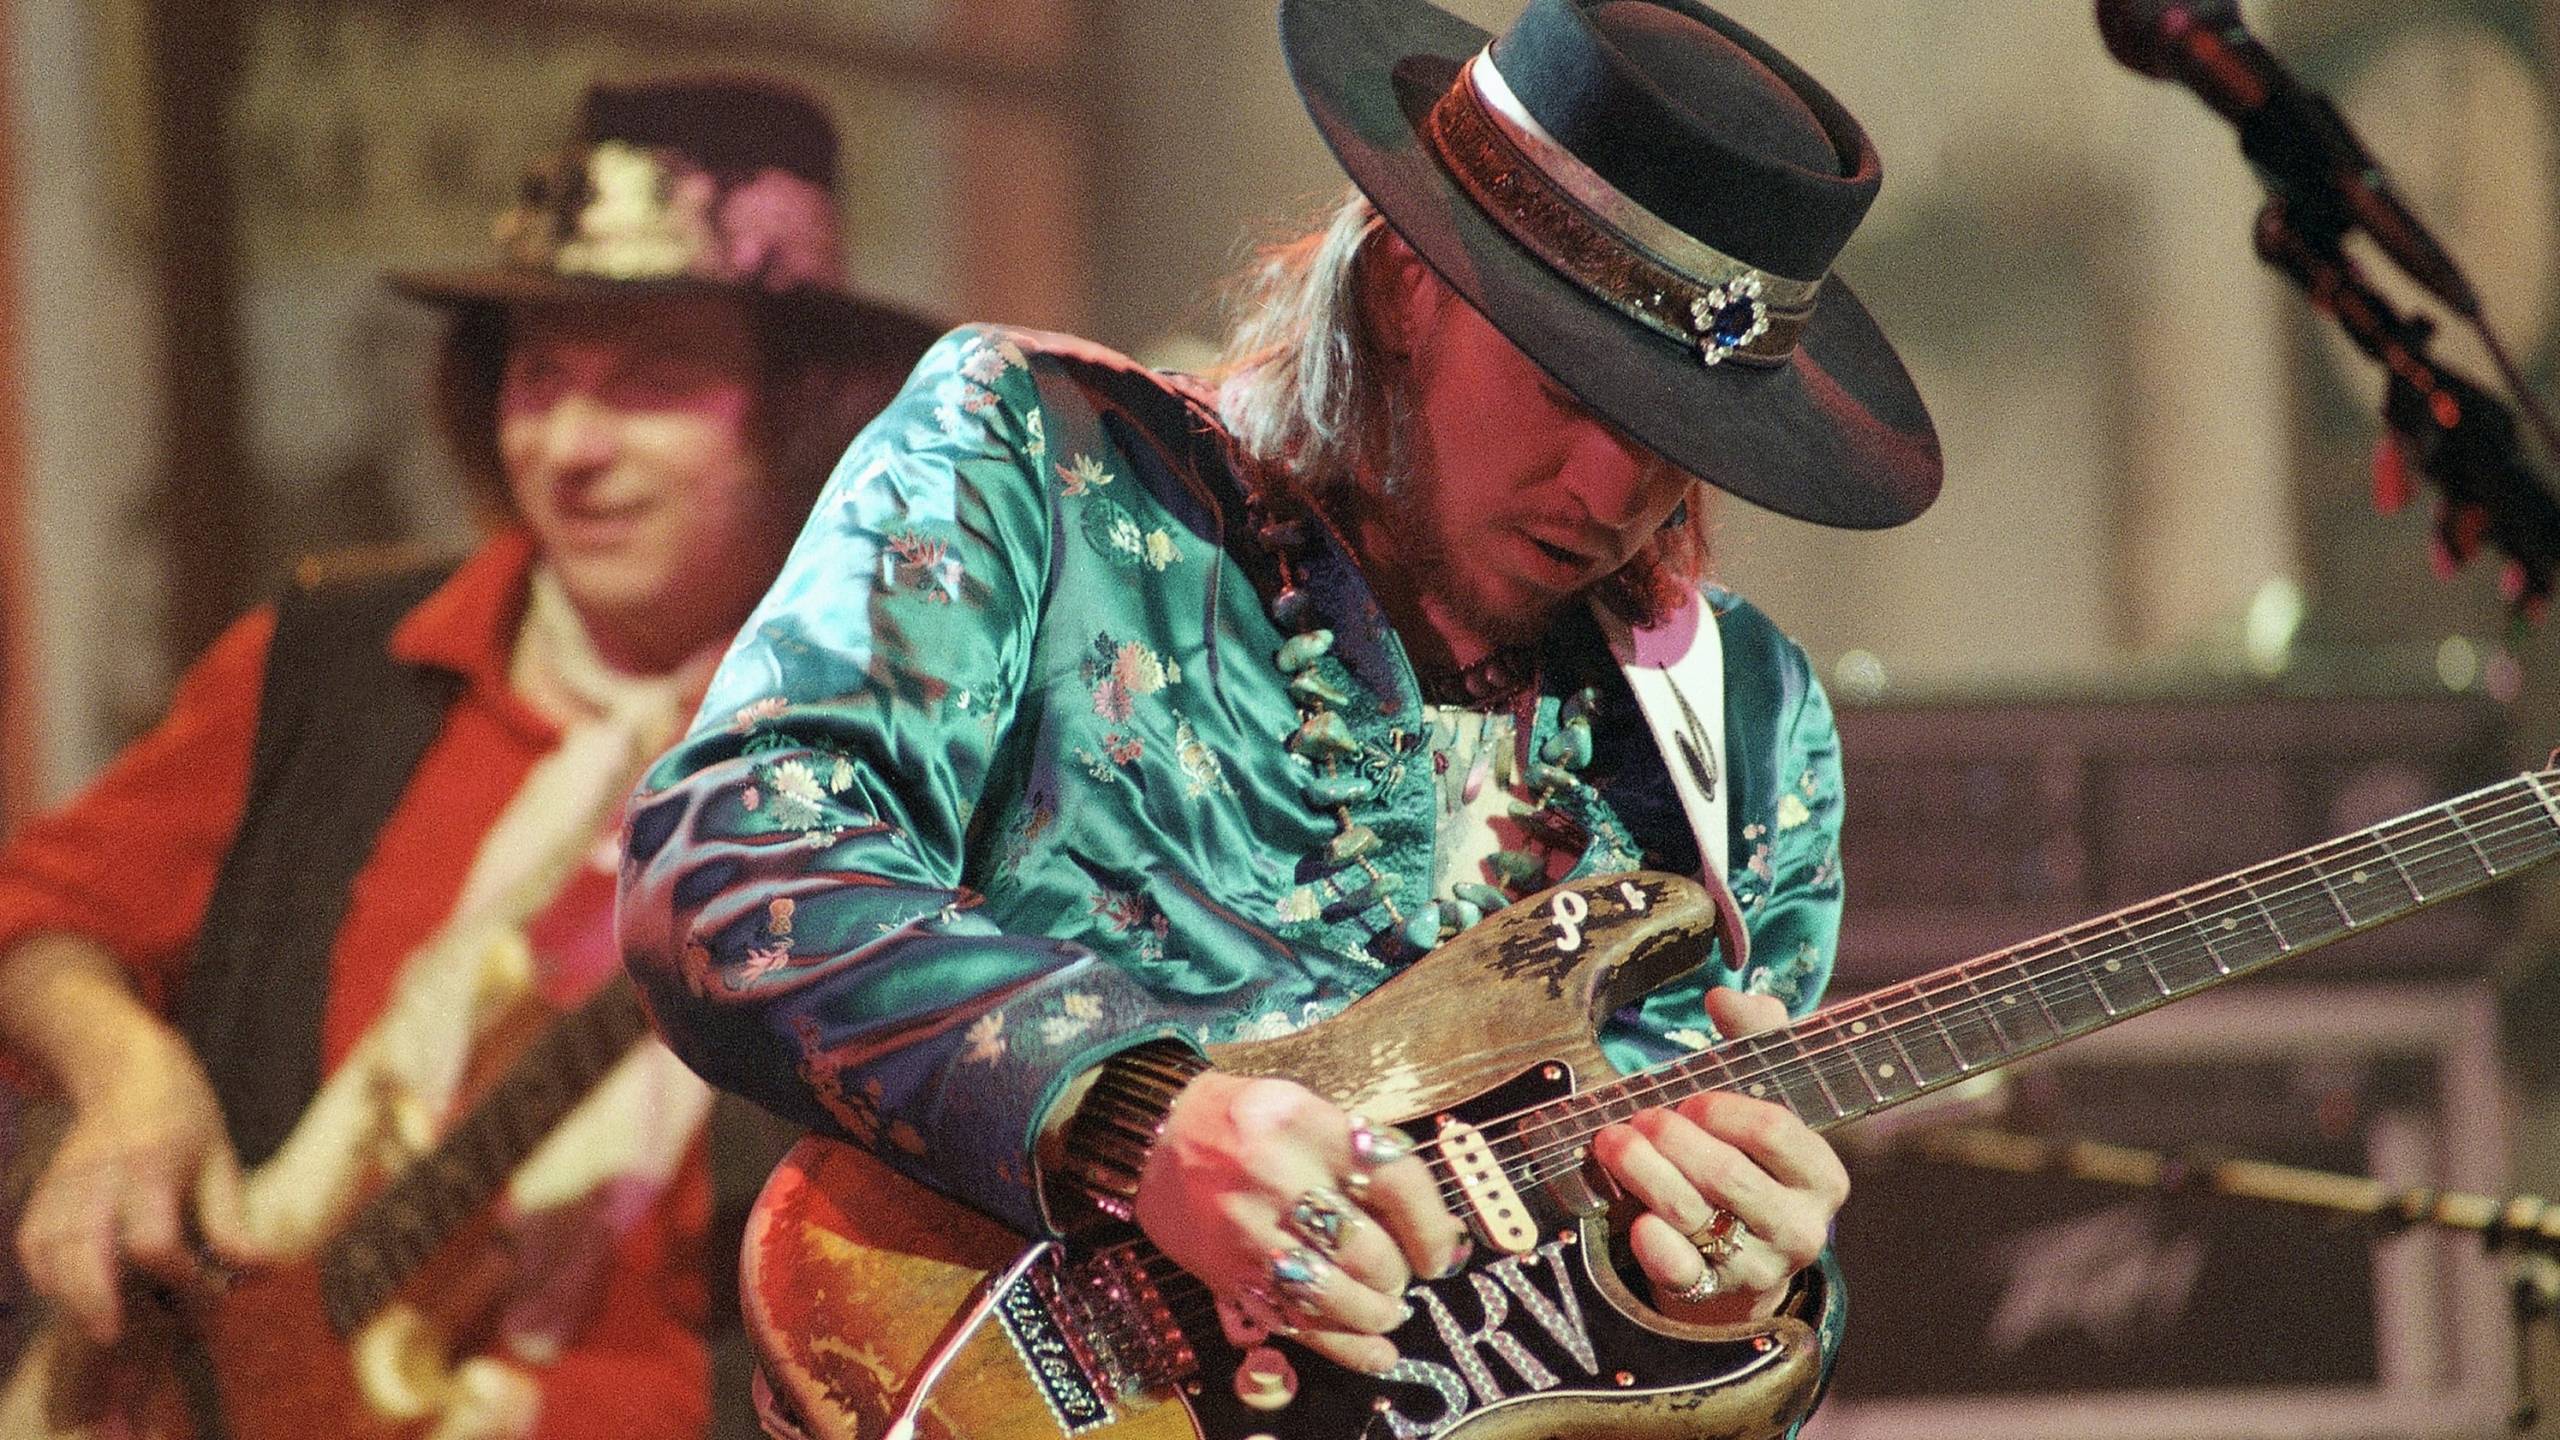 Cubierta de Live at the El Mocambo: Stevie Ray Vaughan and Double Trouble